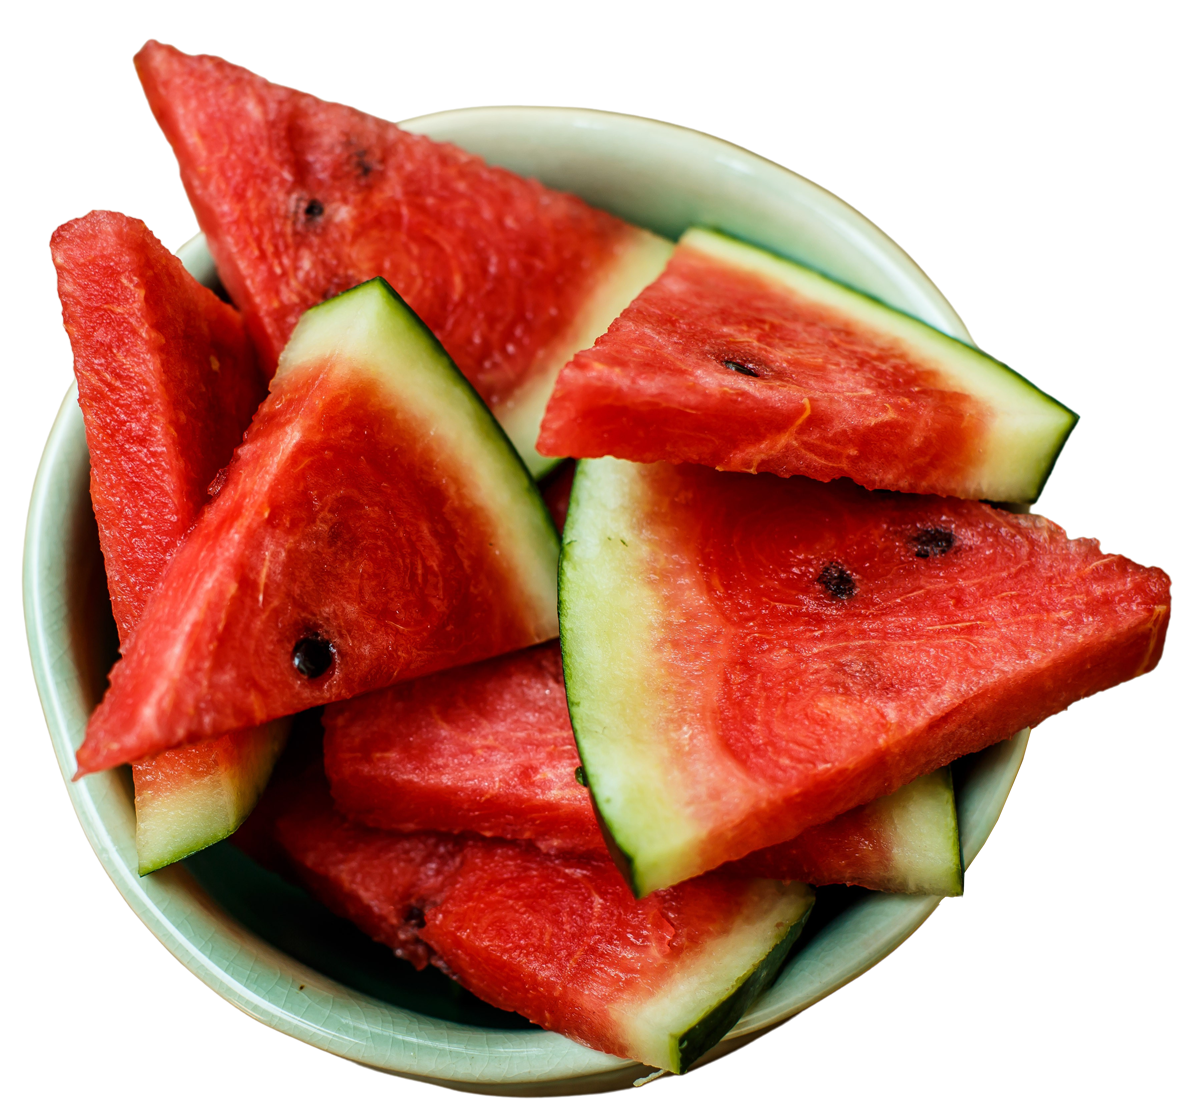 Bowl of Watermelon Image